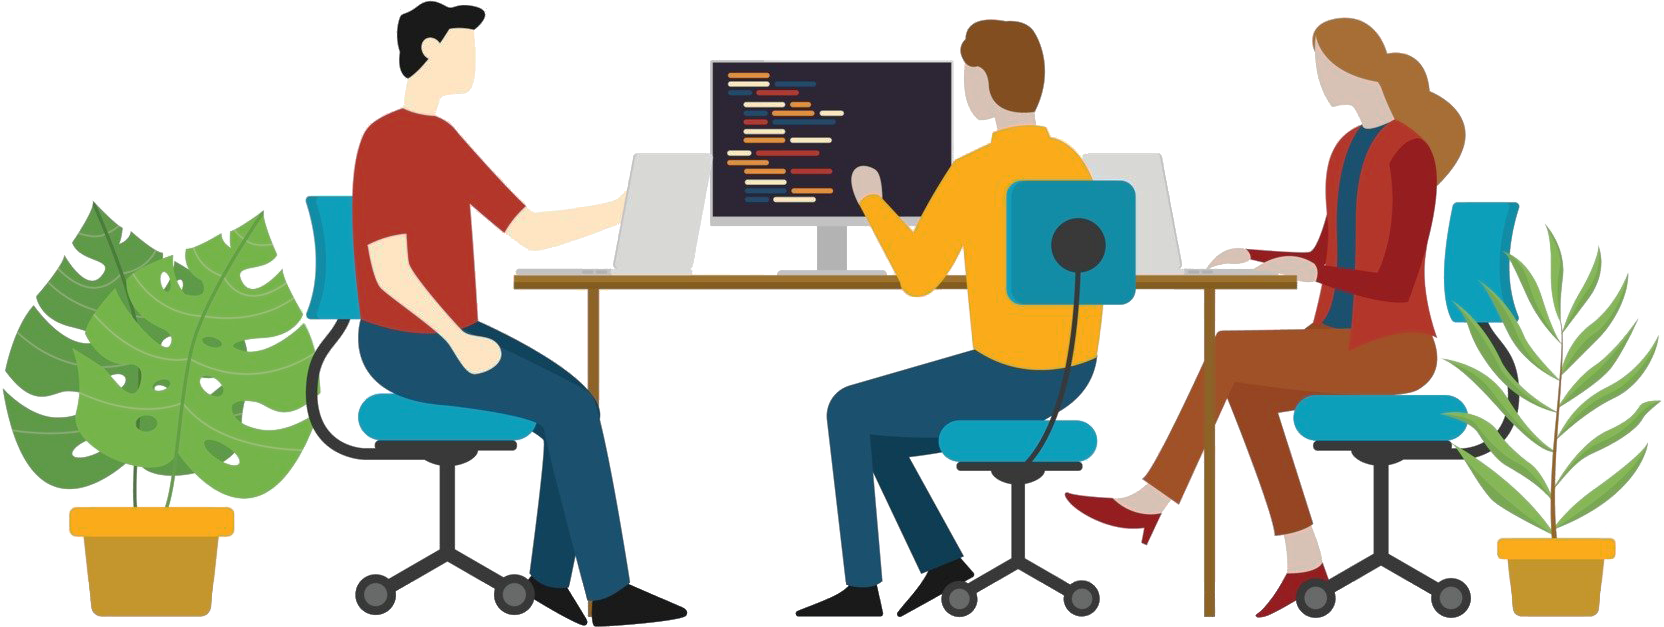 Illustration of people working at a desk